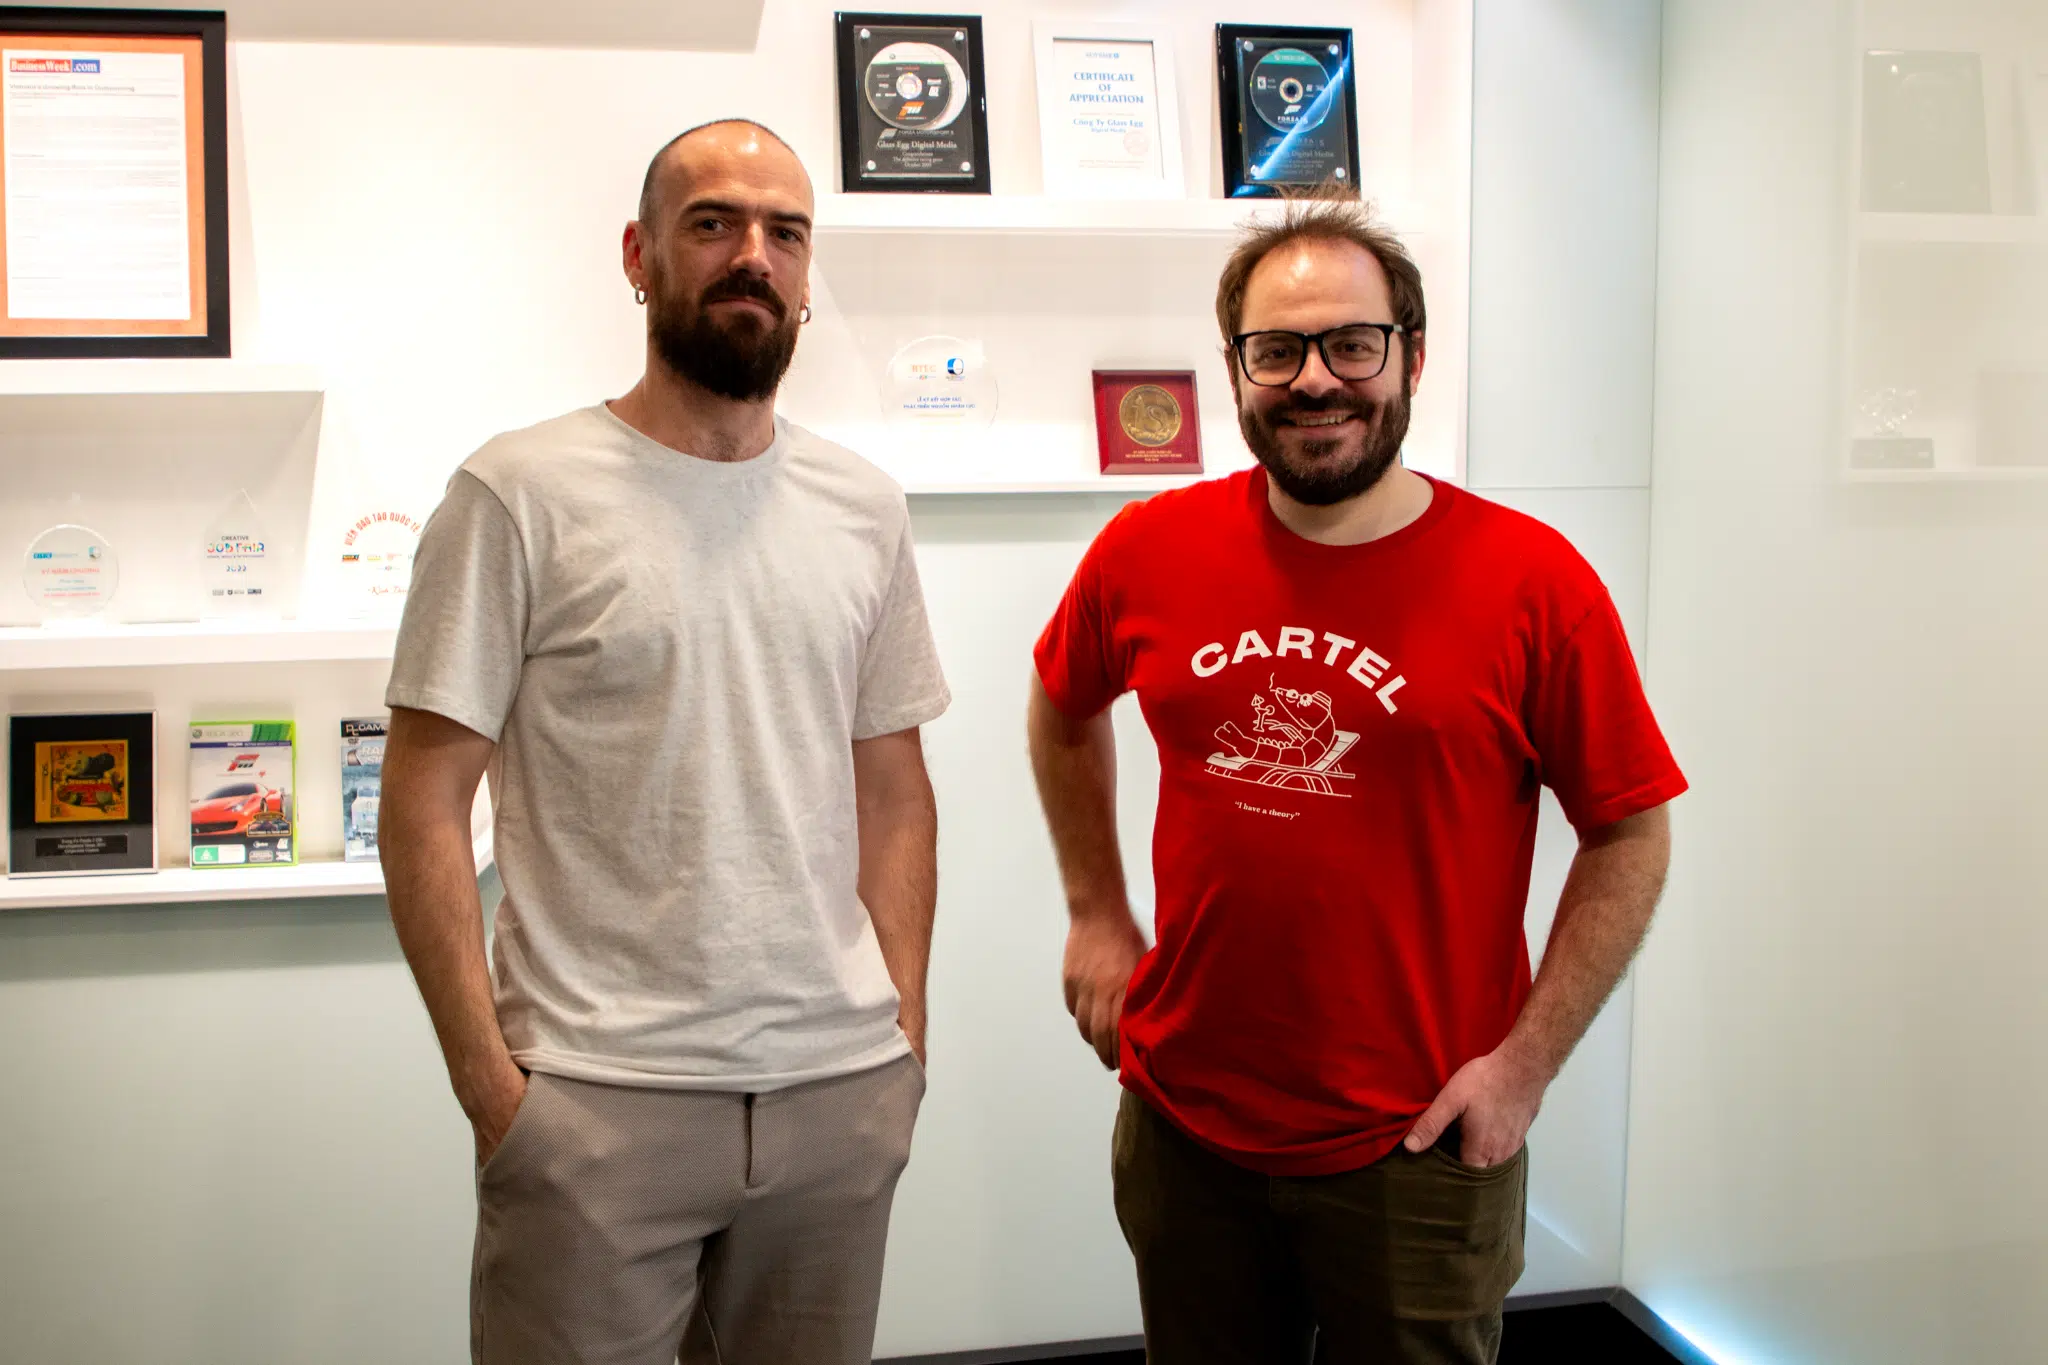 Nicolas Vallet and Quentin Gautier, Lead Concept Artists at Virtuos Montreal